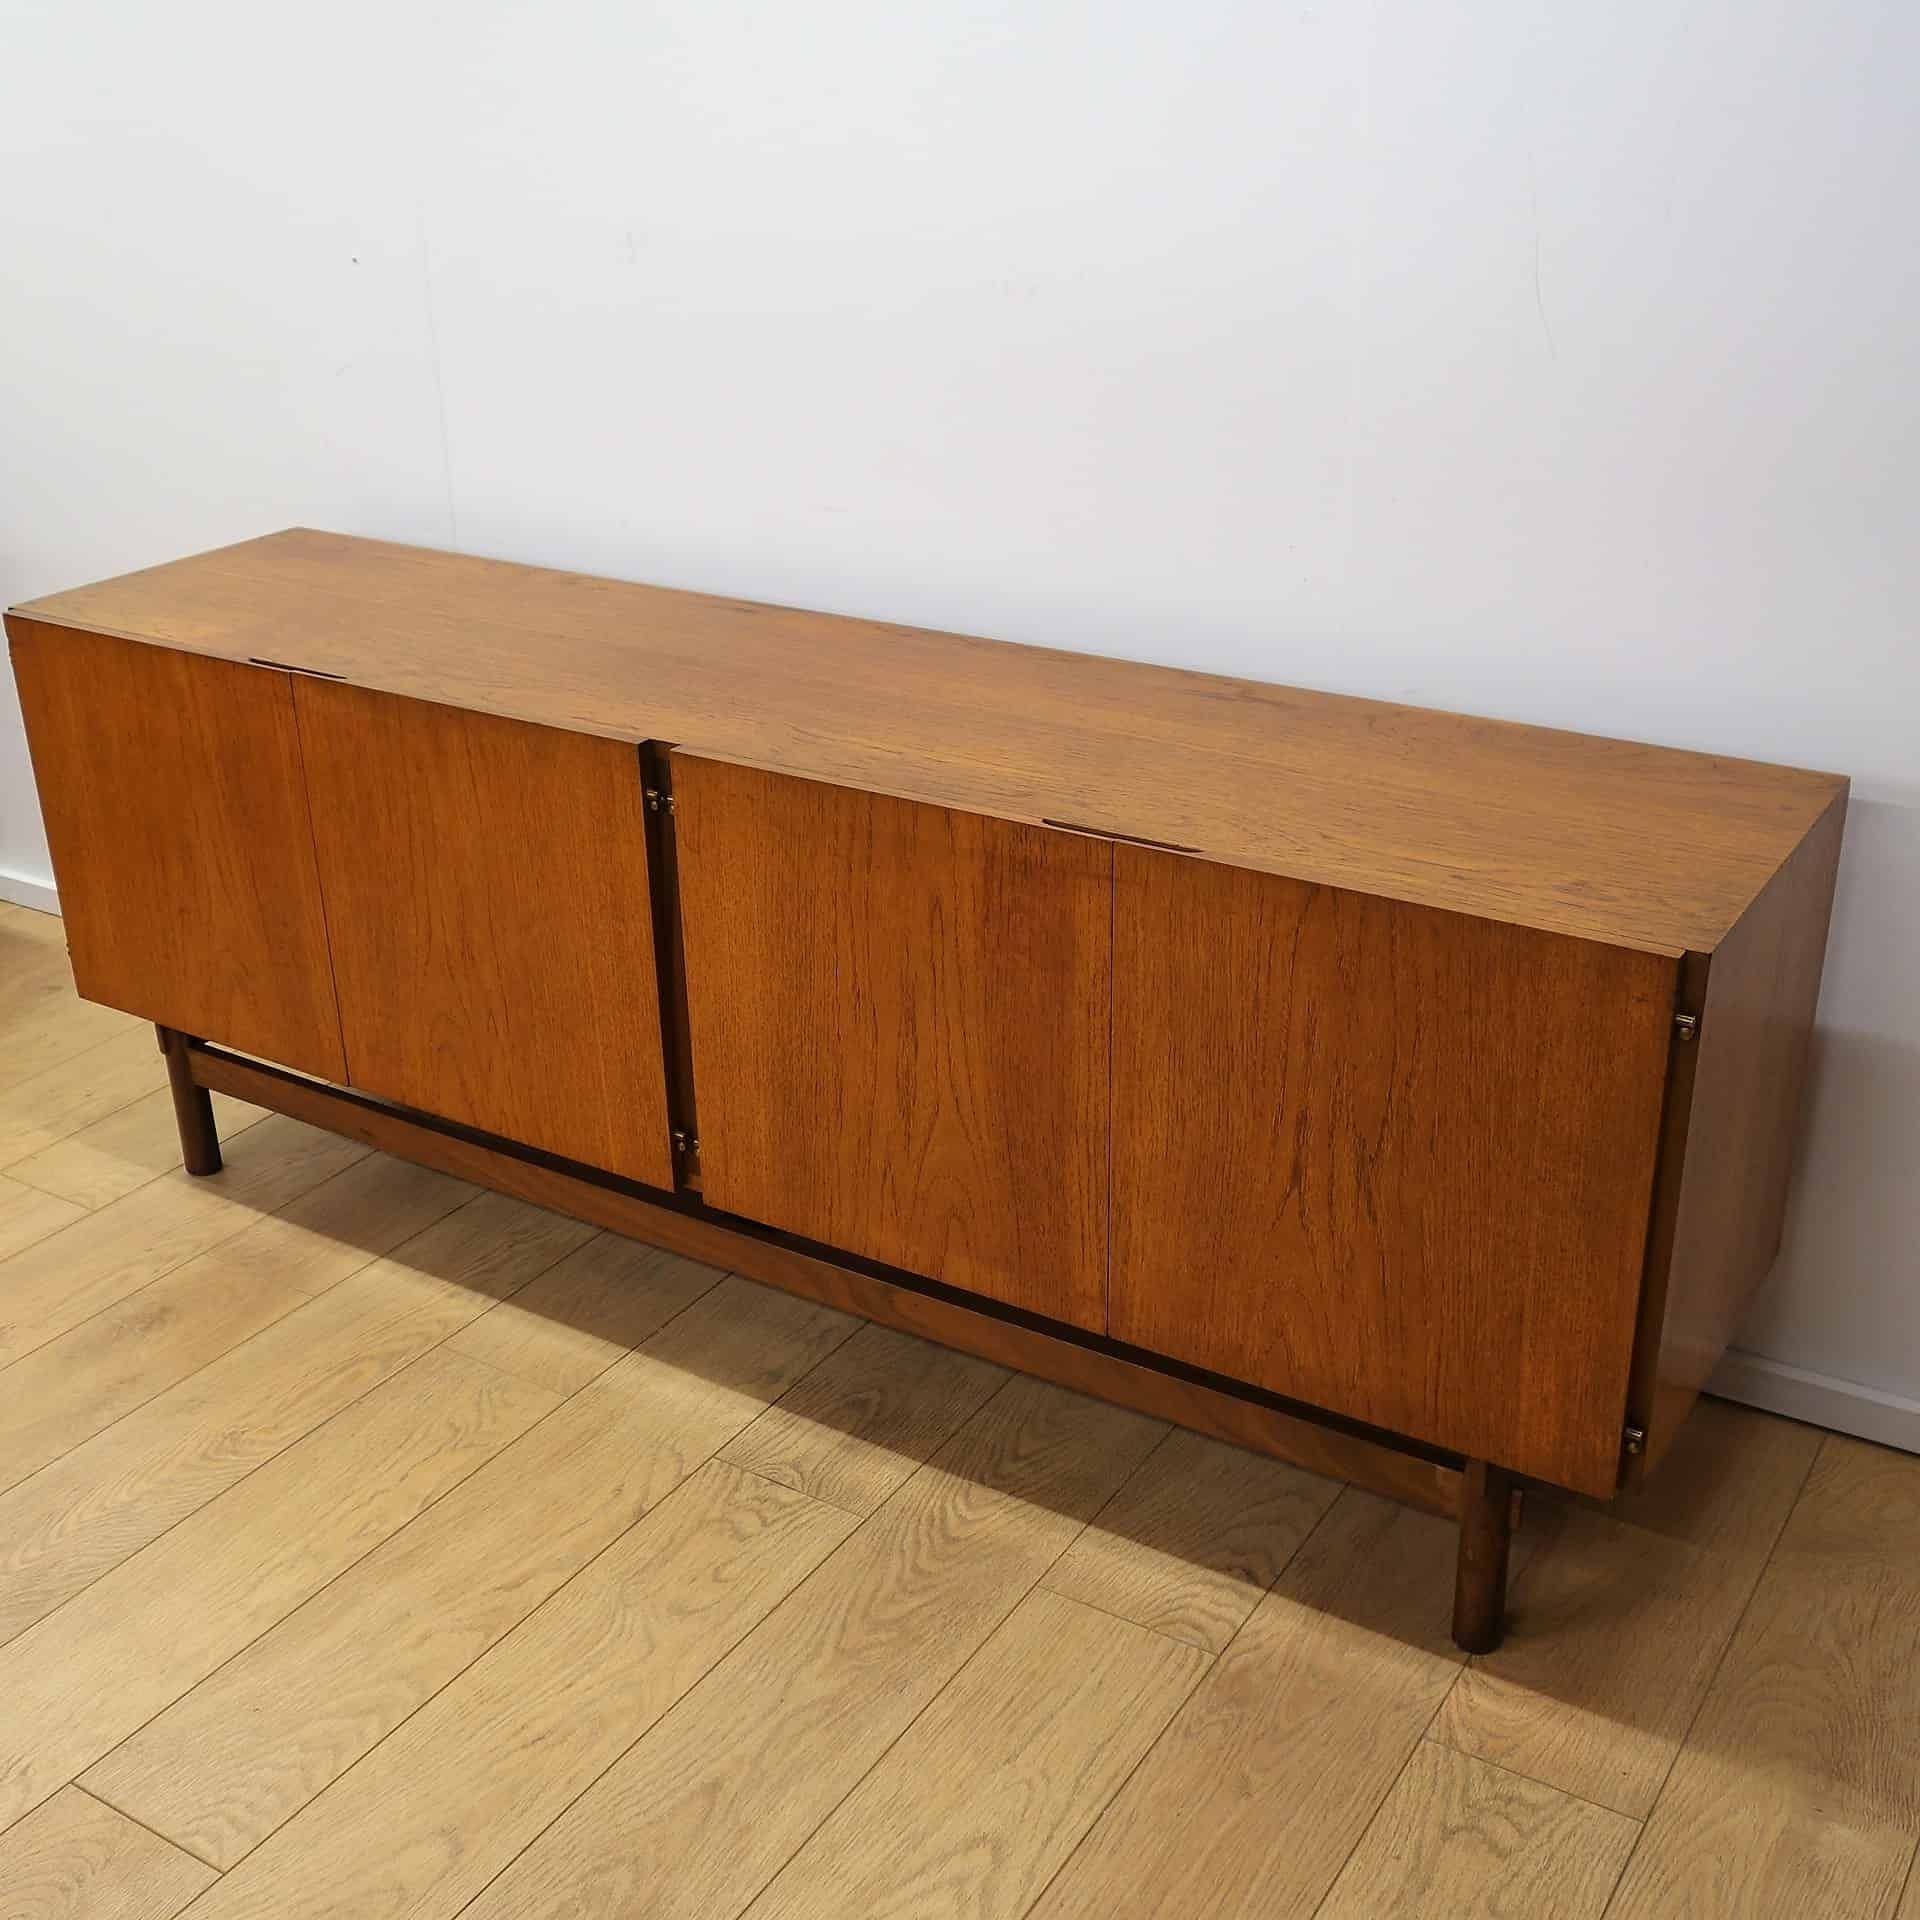 1960s Teak Sideboardvanson – Mark Parrish Mid Century Modern Inside Best And Newest Parrish Sideboards (View 4 of 20)